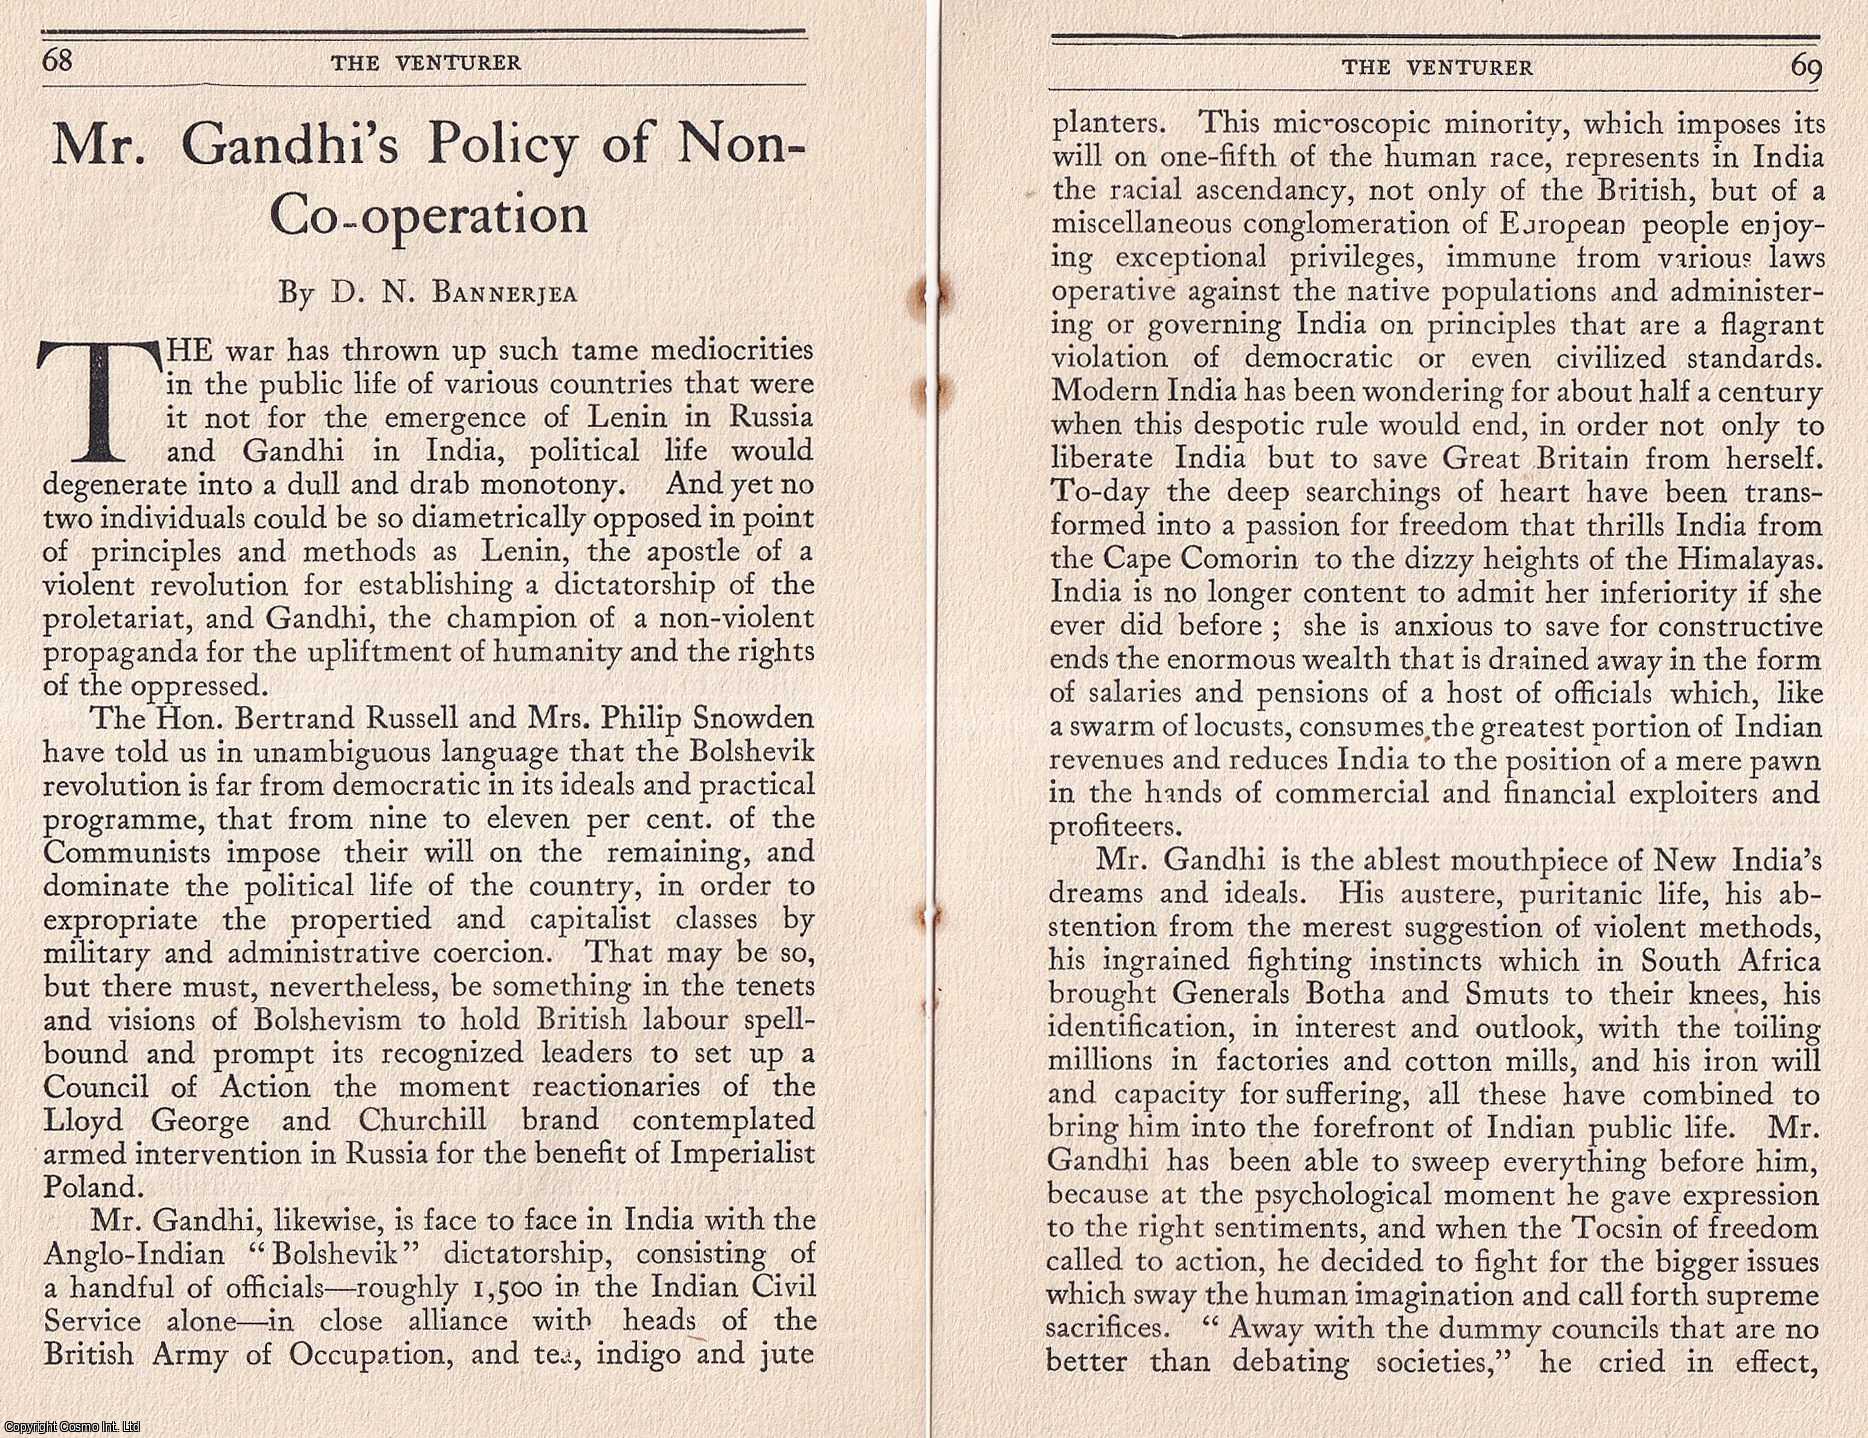 D.N. Bannerjea - Mr Ghandi's Policy of Non-Co-operation. An original article from The Venturer, a Journal of Social and World Fellowship, 1920.